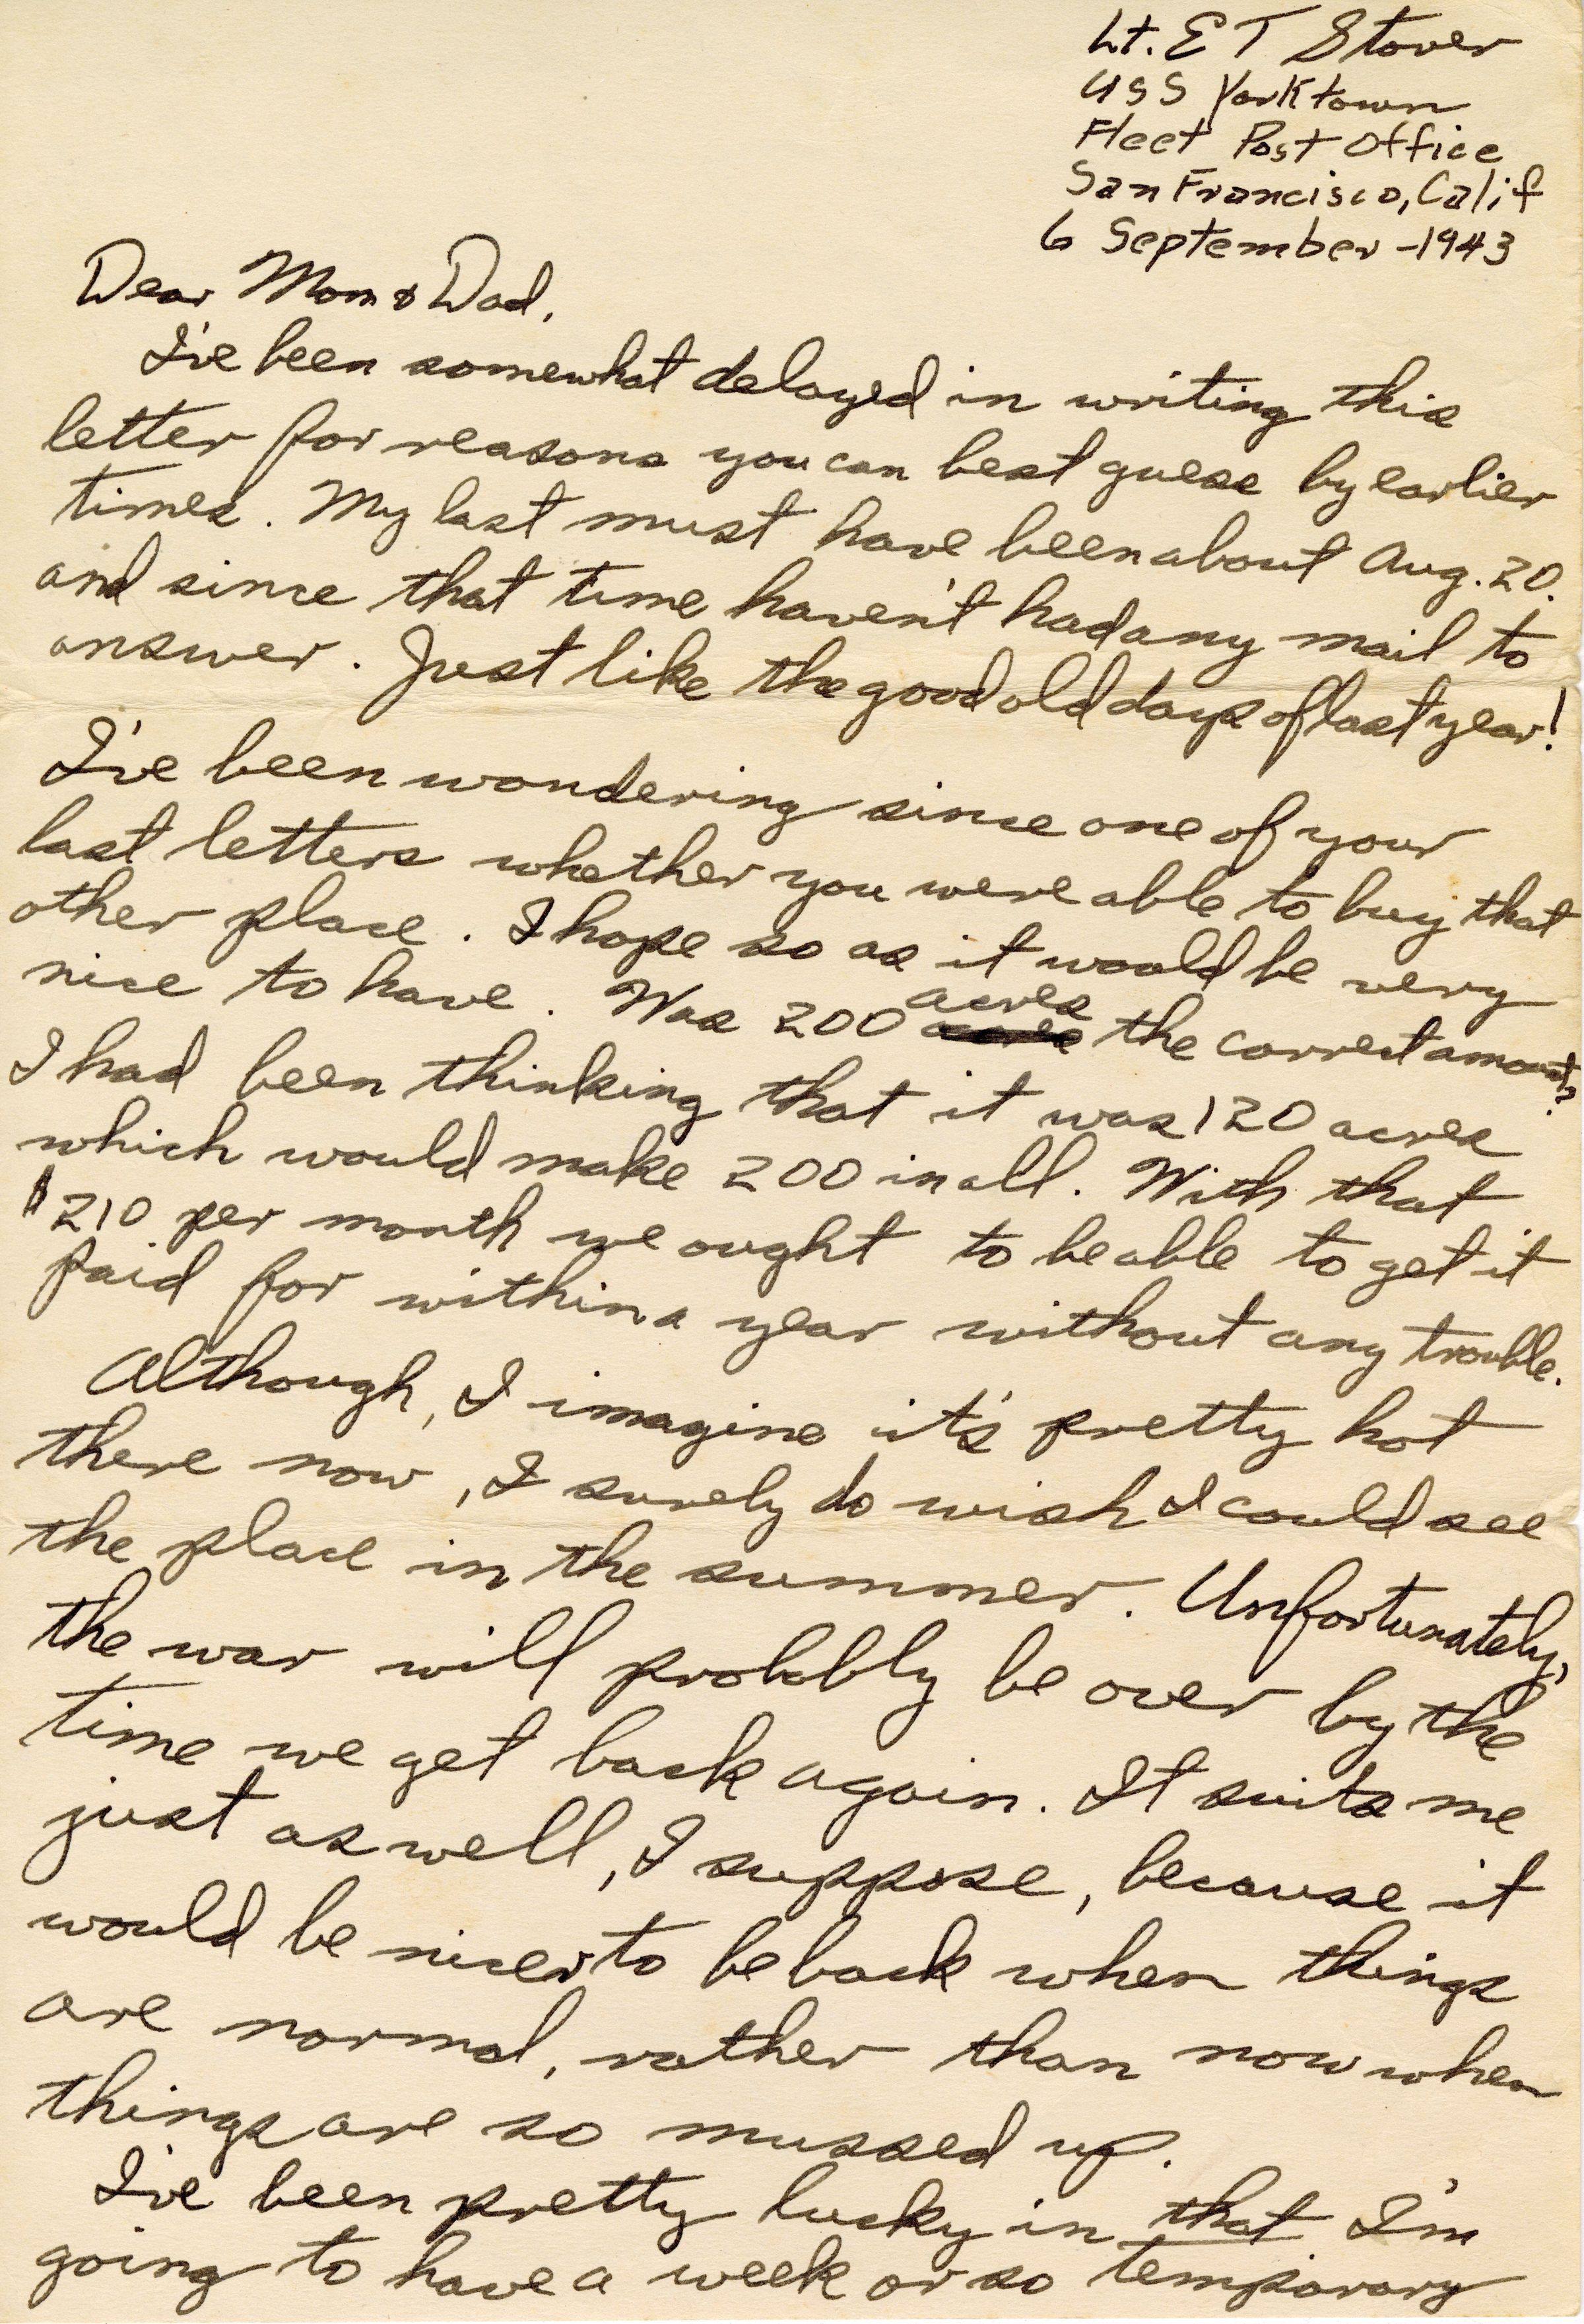 Primary Image of Letter From Elisha 